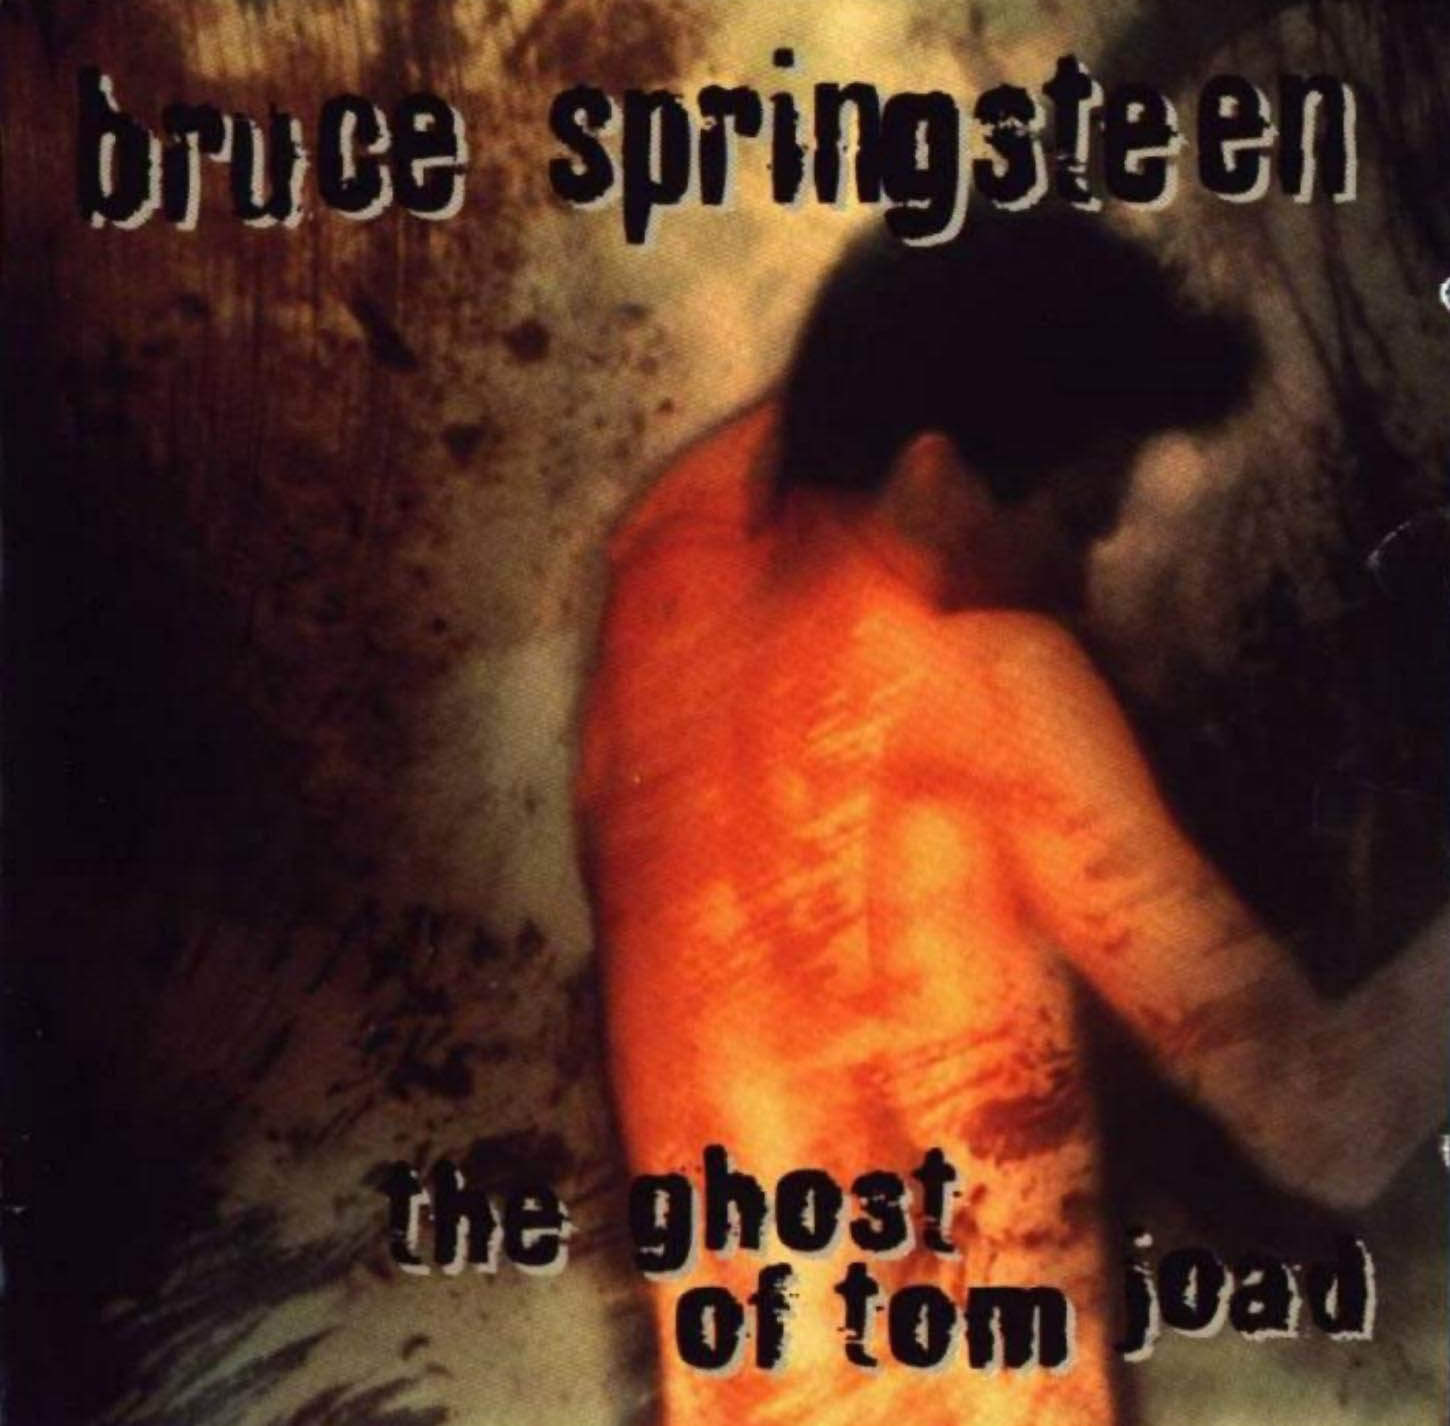 Cartula Frontal de Bruce Springsteen - The Ghost Of Tom Joad